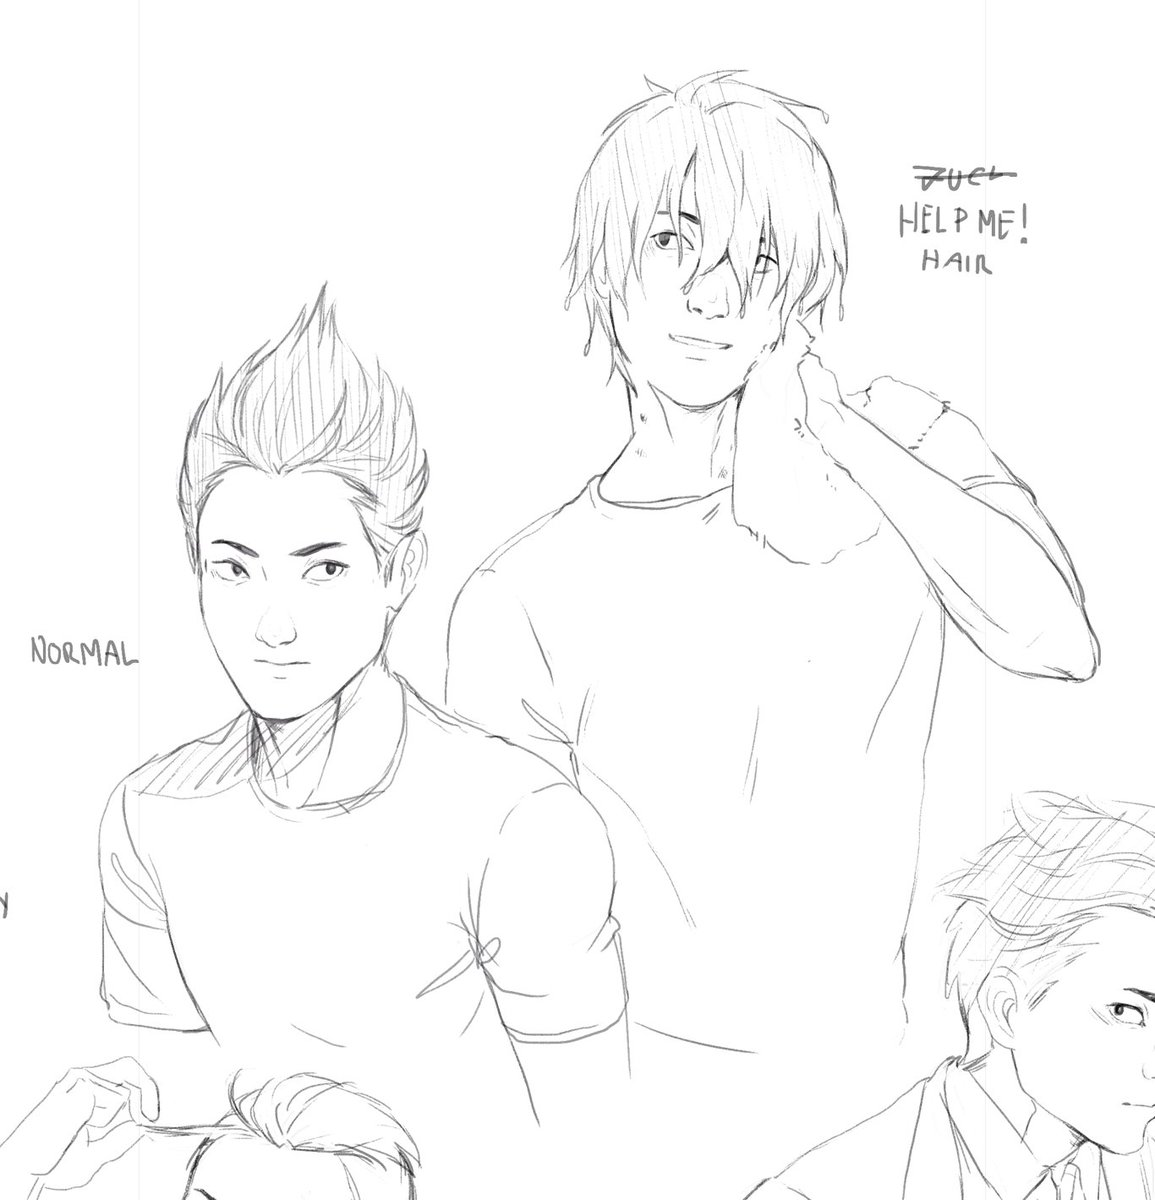 kindaichi with hair down anyone? 
just...  good damn it boy!
(i made some freinds suffere because of this. now you have to suffere with us hahah)
shoutout to kakkoweeb on tumblr!!! 